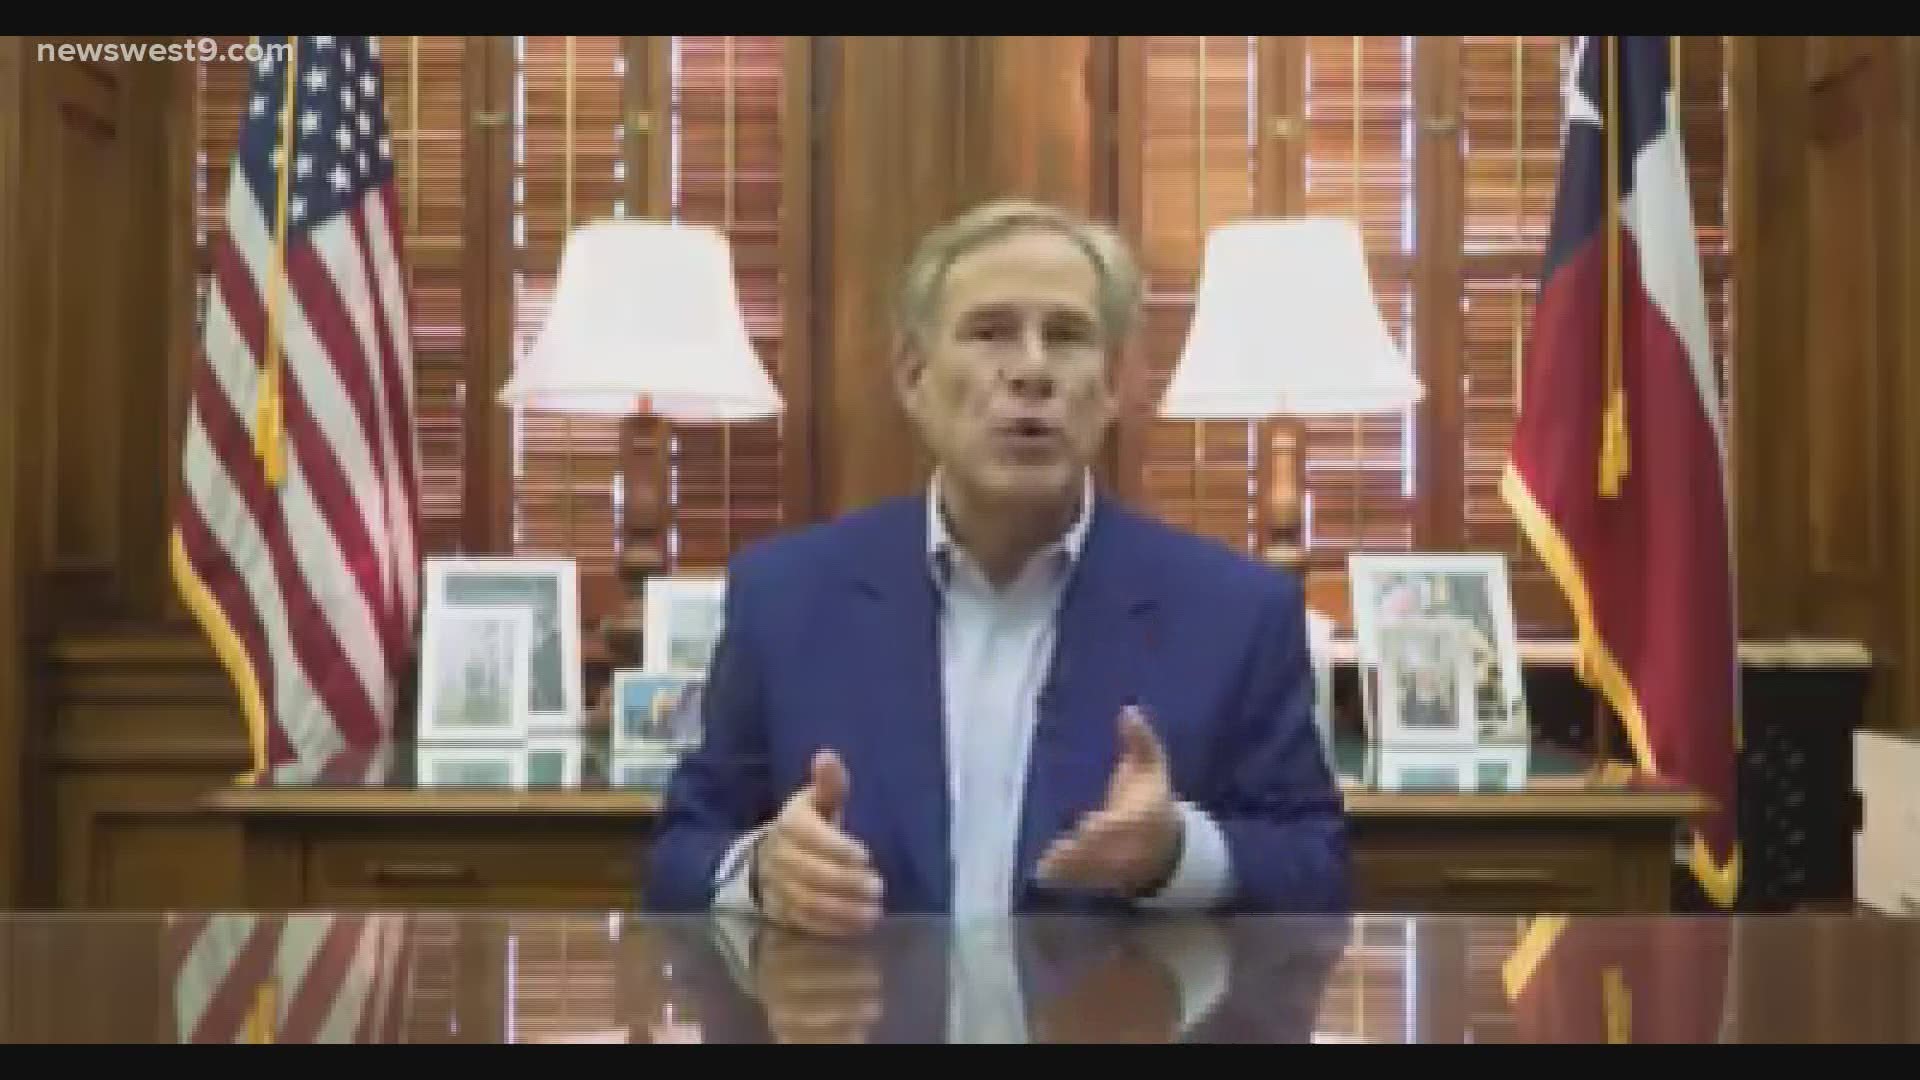 The announcement comes after Gov. Abbott tweeted Monday COVID-19 numbers "remained contained," and he would be announcing more reopenings soon.